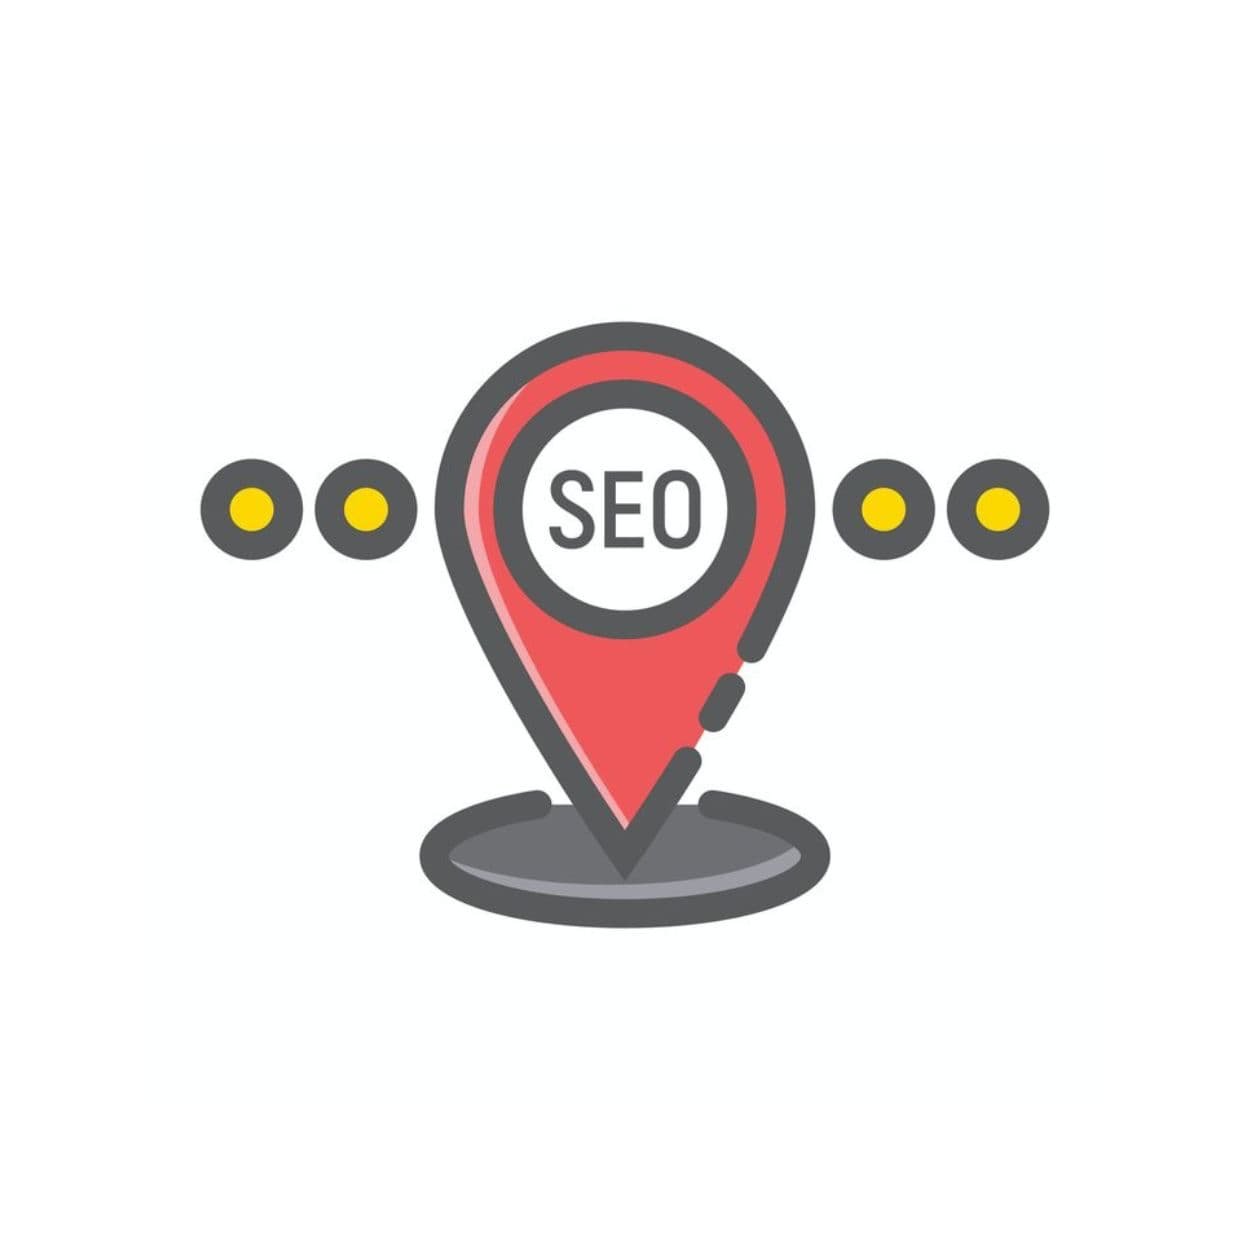 Local SEO and Small Business: 3 Tips You Can Use Today